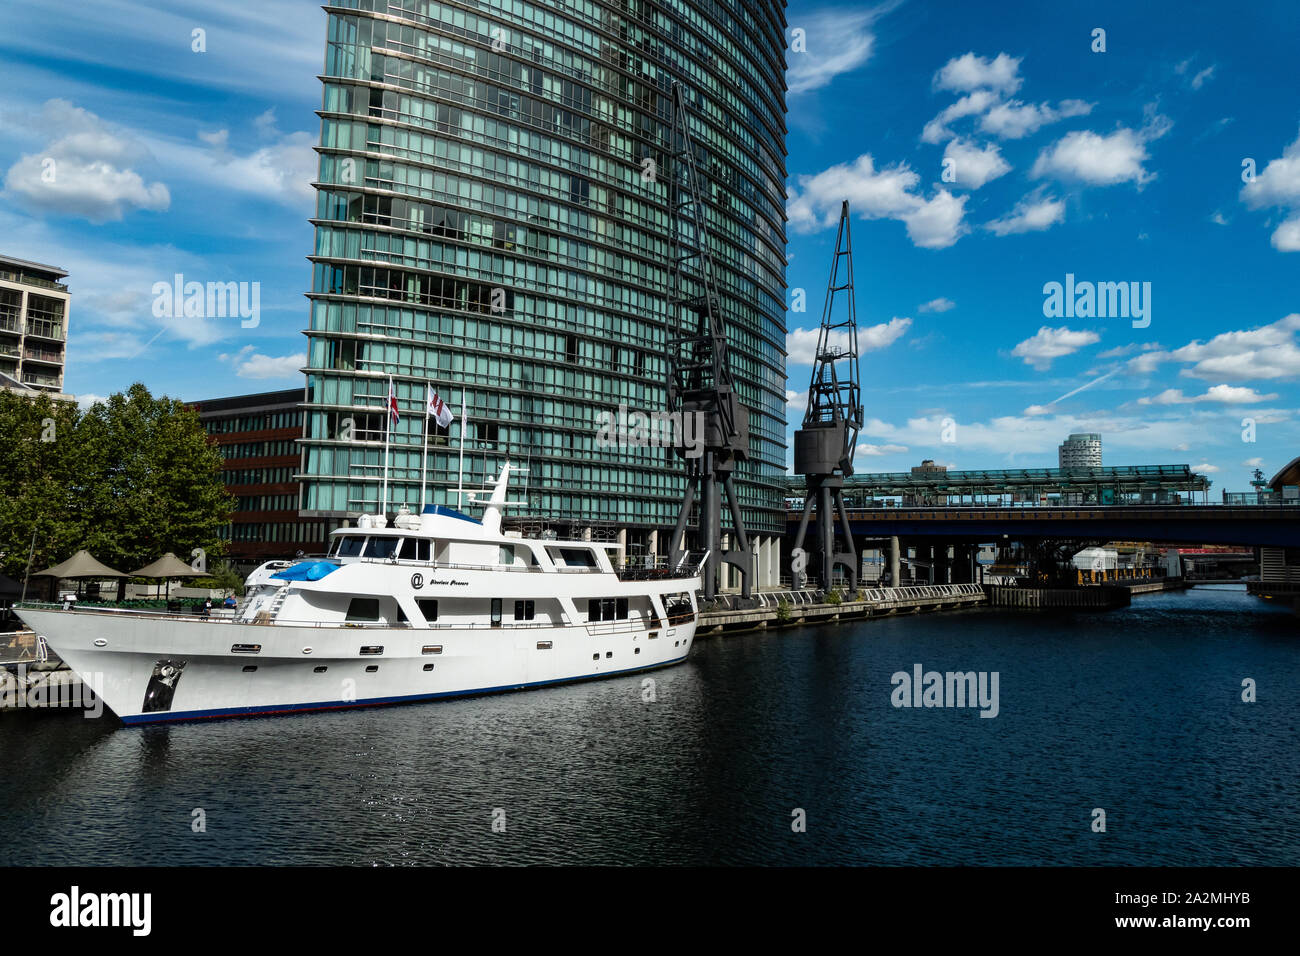 A luxury yacht moored in the waterway of Canary Wharf, London,  with the high rise business building in the background Stock Photo